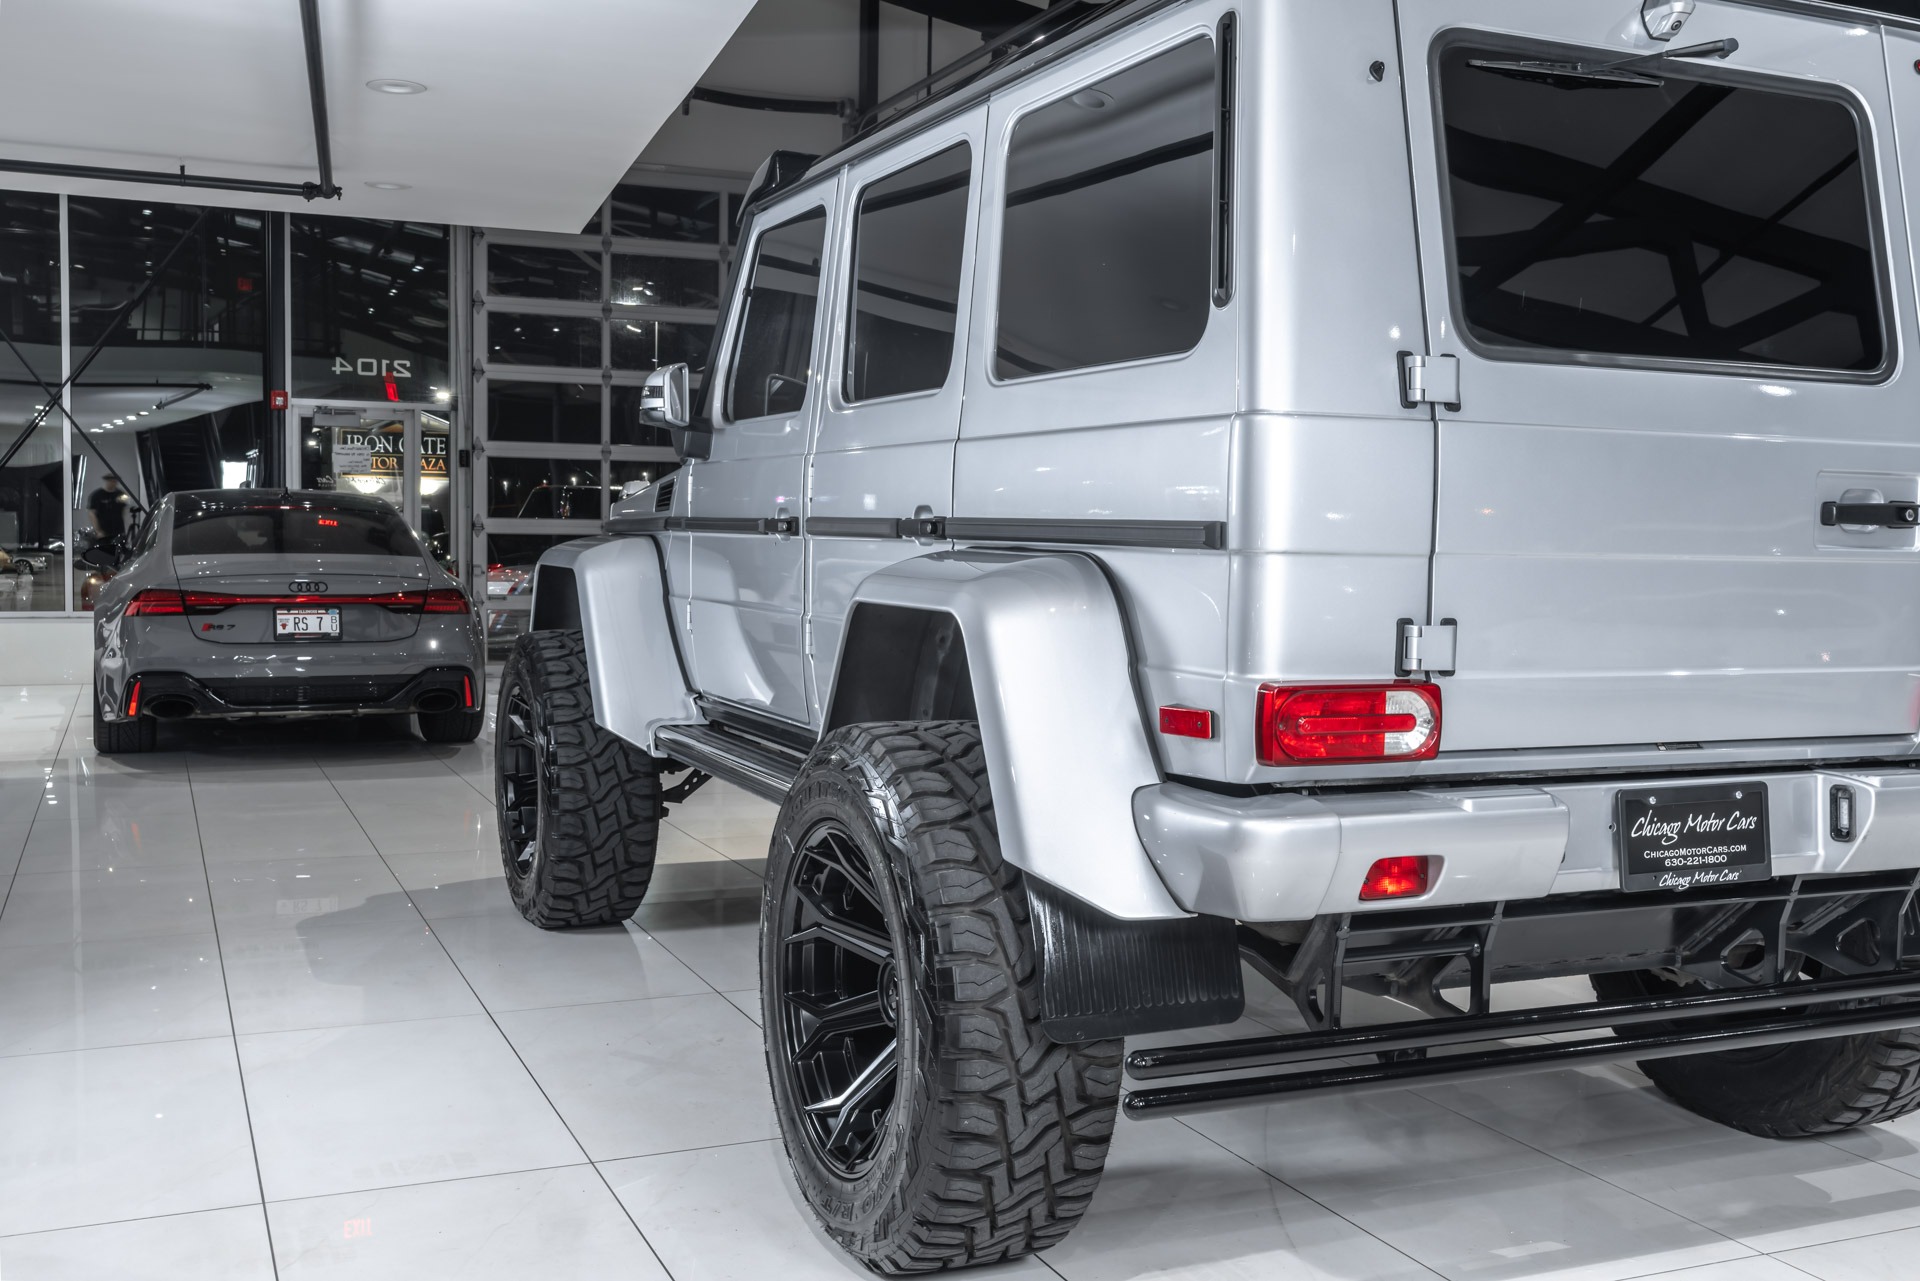 Used-2018-Mercedes-Benz-G550-4x4-Squared-SUV-Diamond-Stitching-1-Of-300-Ever-Made-Just-Serviced